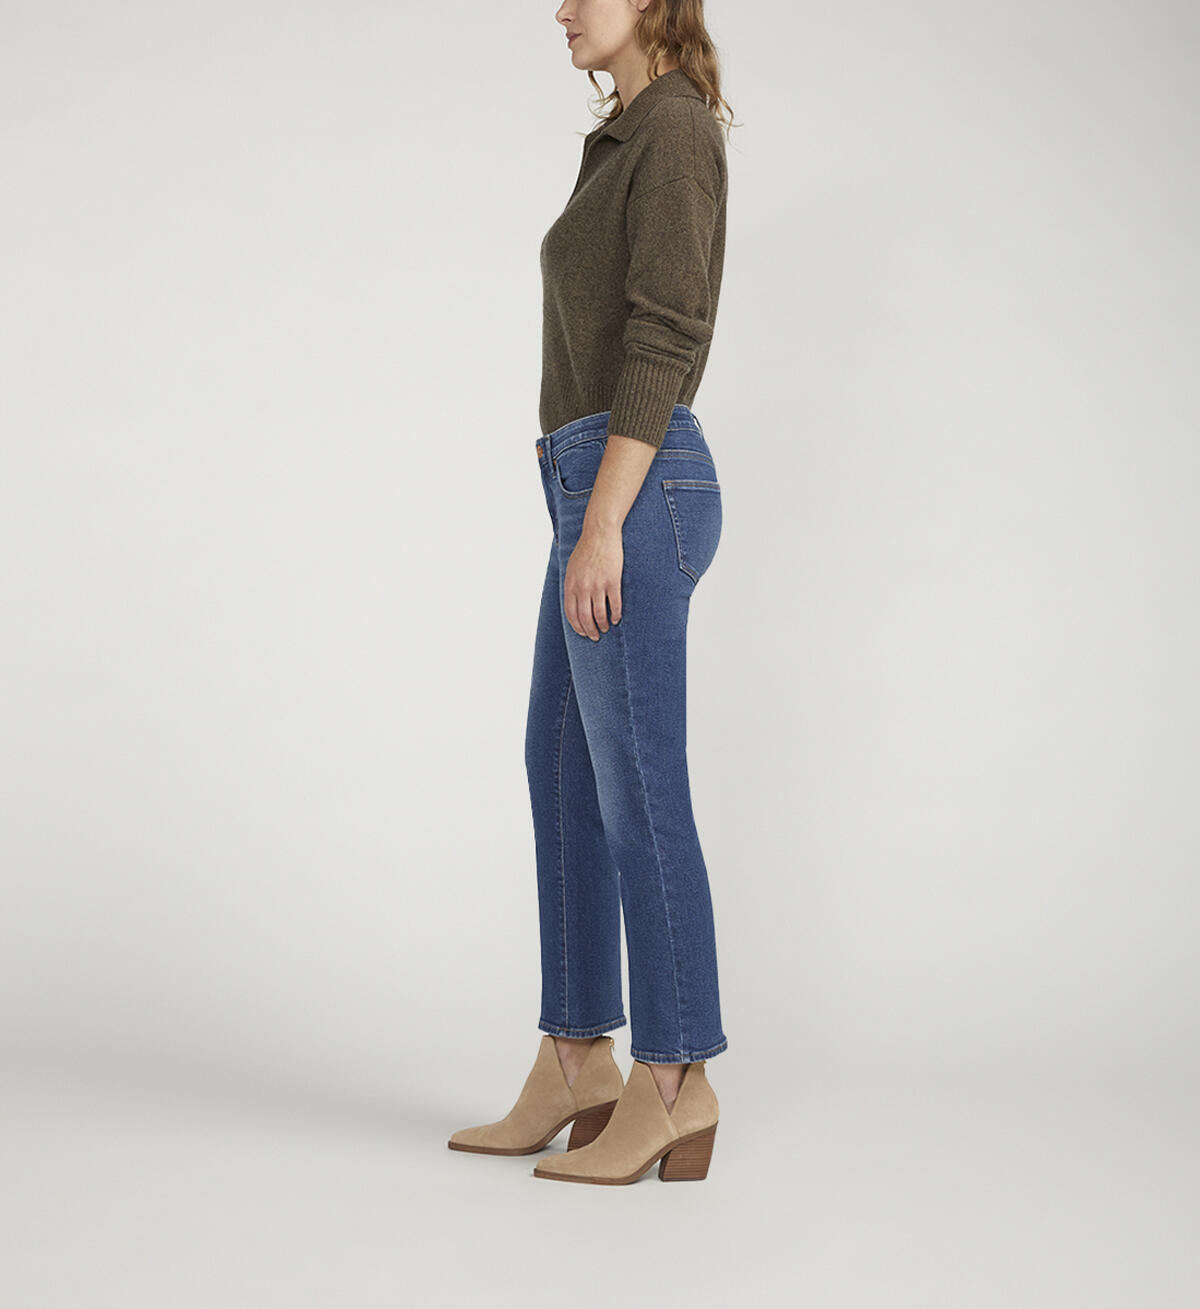 Eloise Mid Rise Cropped Bootcut Jeans, , hi-res image number 2